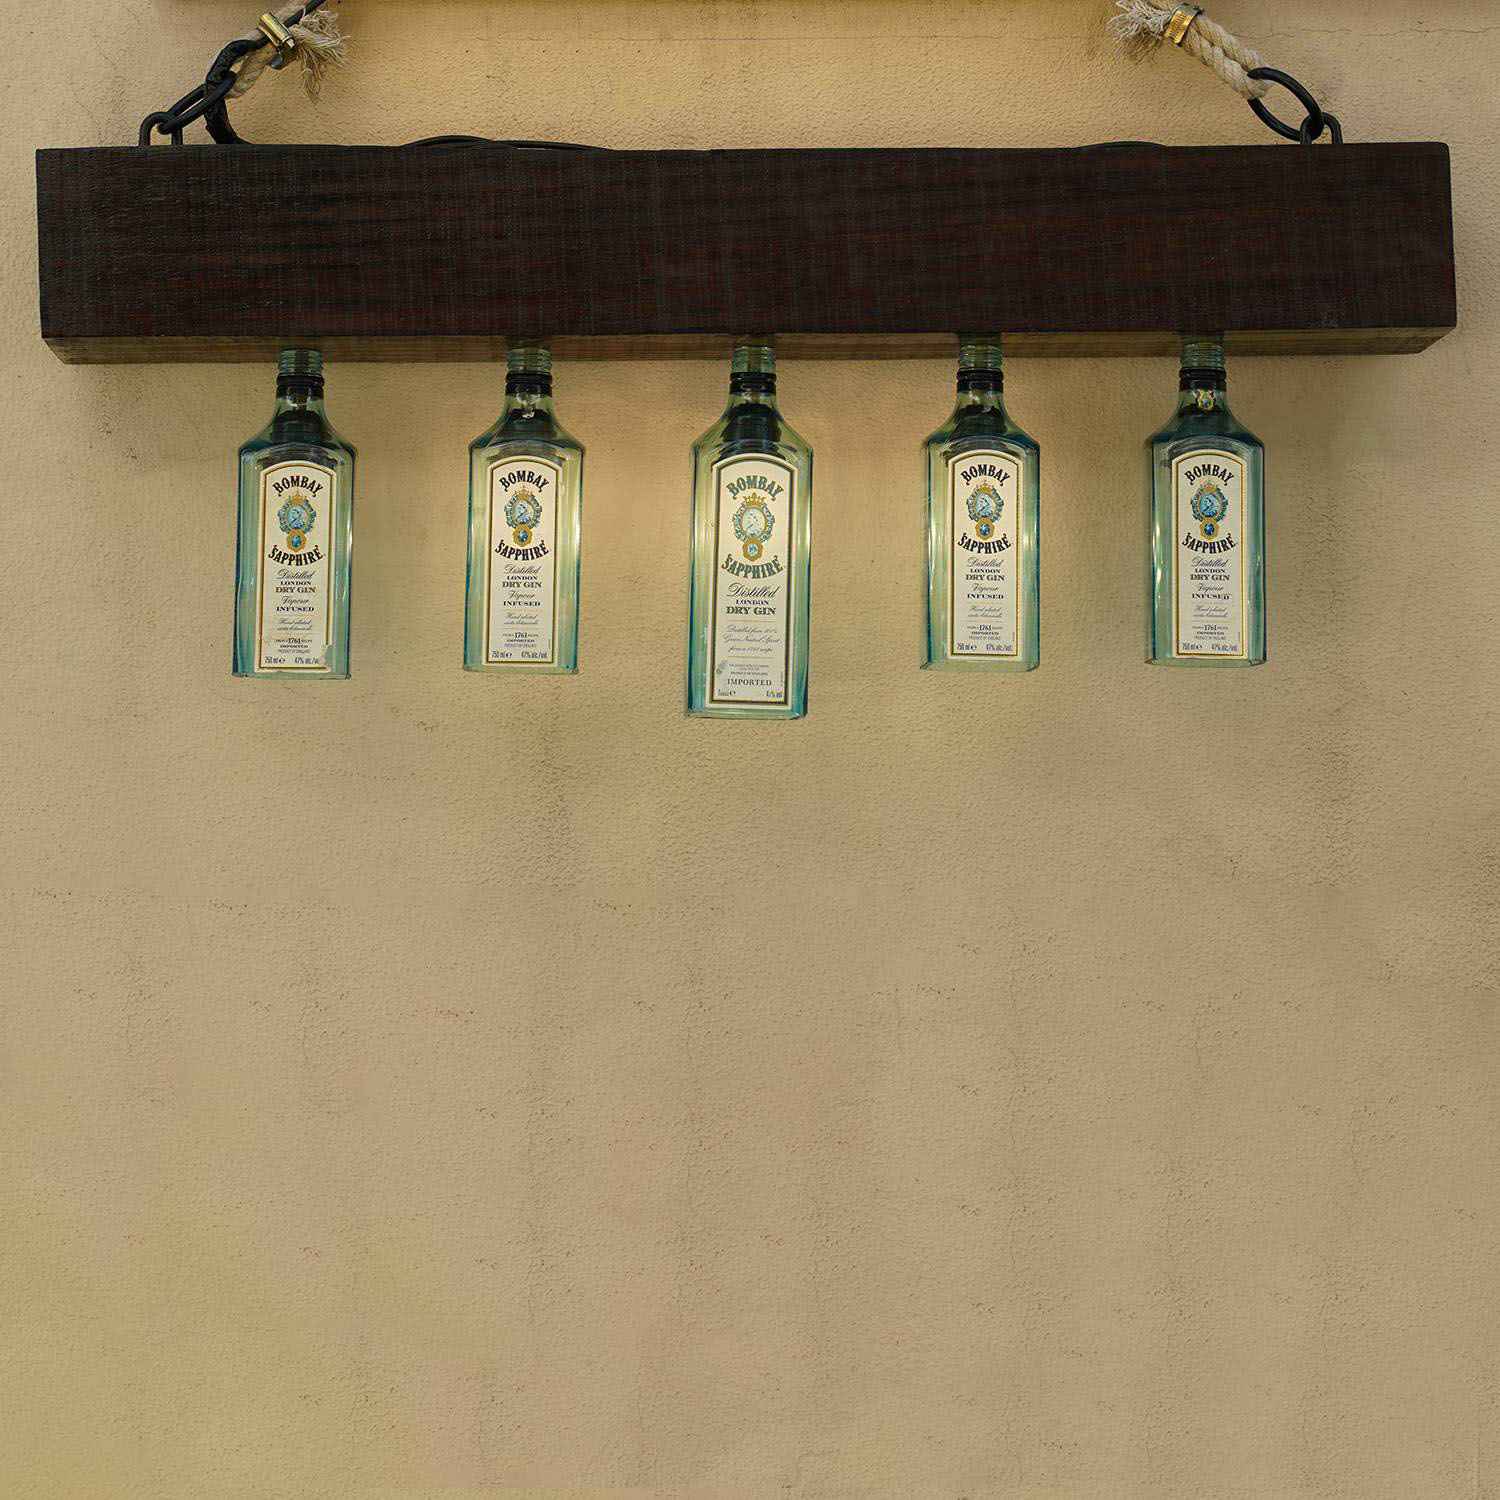 Top Solid Wall Mount Lamp (Recycled Bottle)